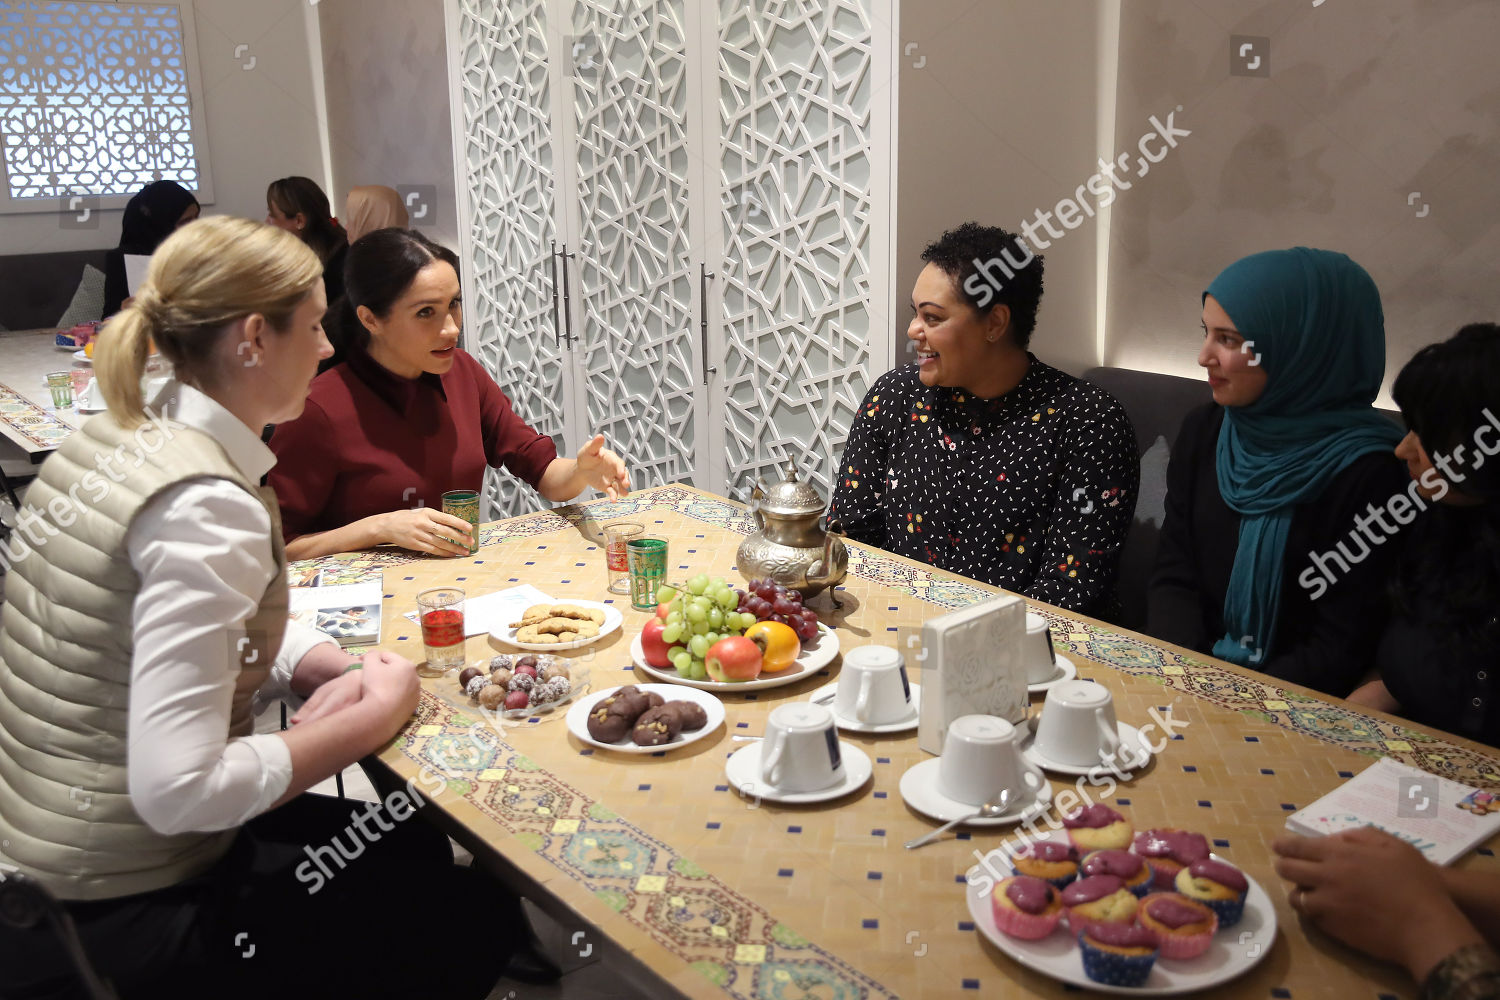 meghan-duchess-of-sussex-visit-to-the-hubb-community-kitchen-london-uk-shutterstock-editorial-9988987ao.jpg